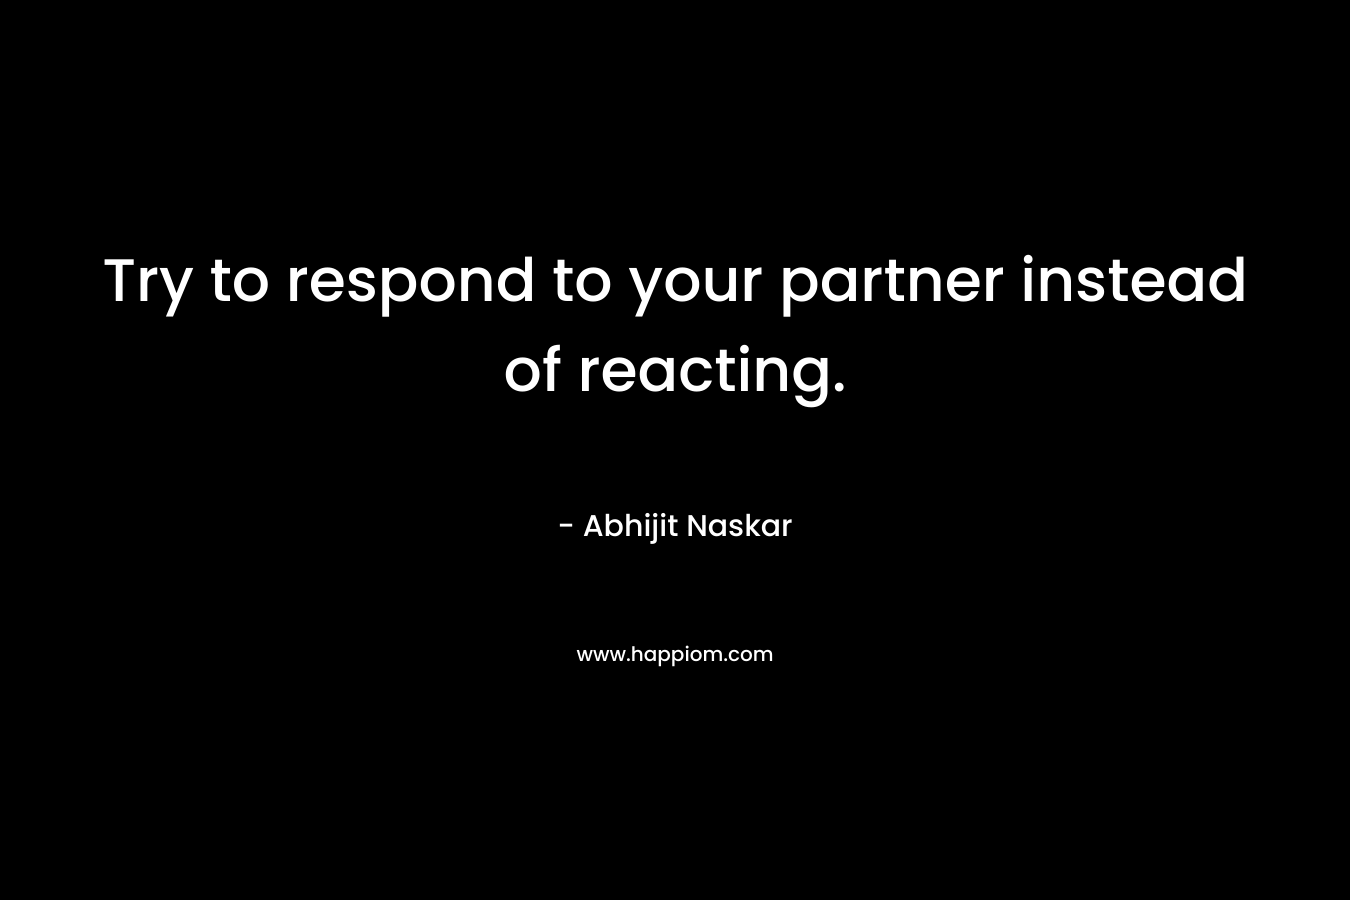 Try to respond to your partner instead of reacting.